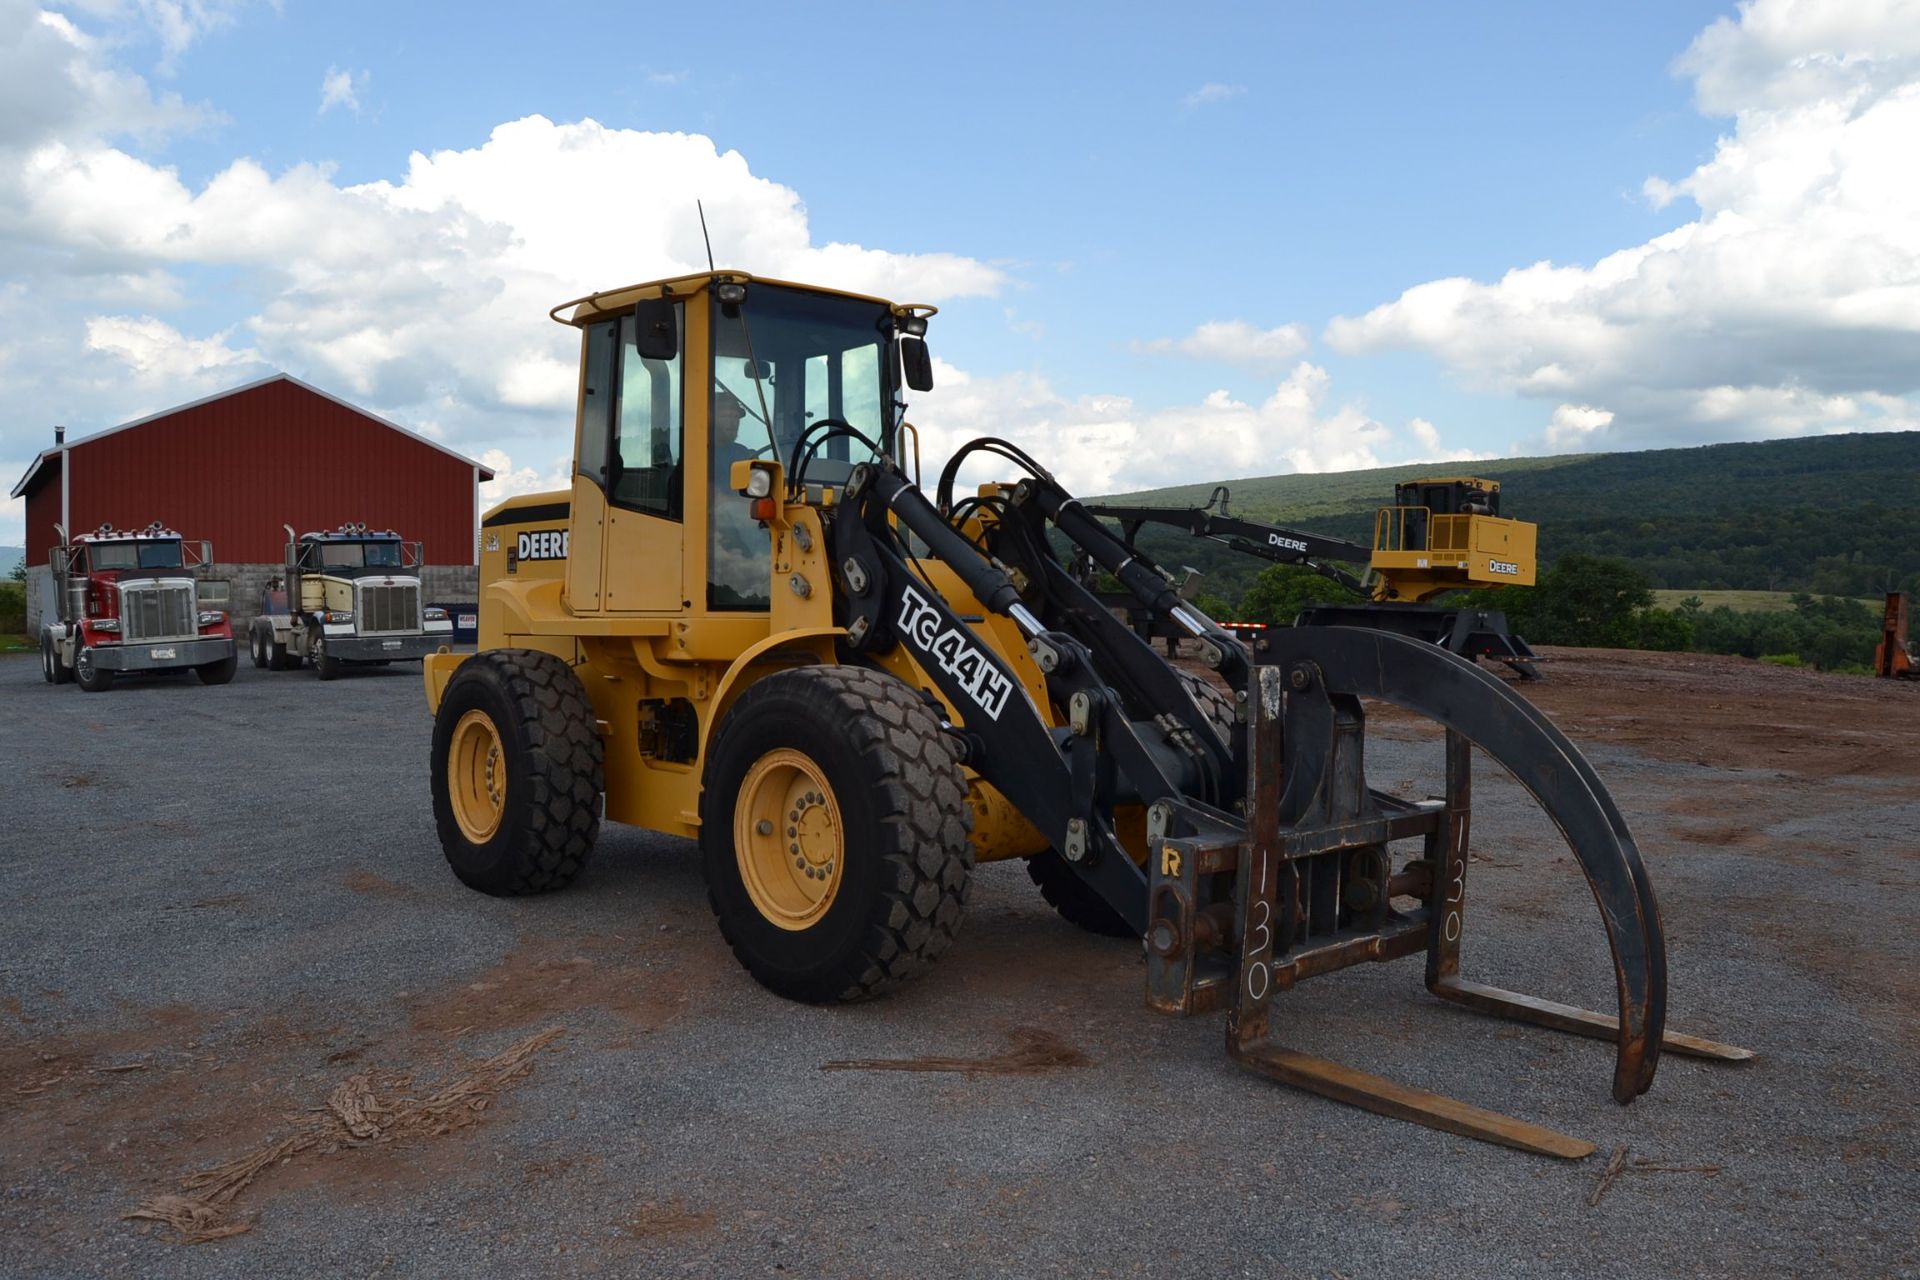 JOHN DEERE TC44H ARTICULATING WHEEL LOADER W/ FORKS W/ SINGLE HOLD DOWN W/ ENCLOSED CAB W/ 17.5Z25 - Image 4 of 4